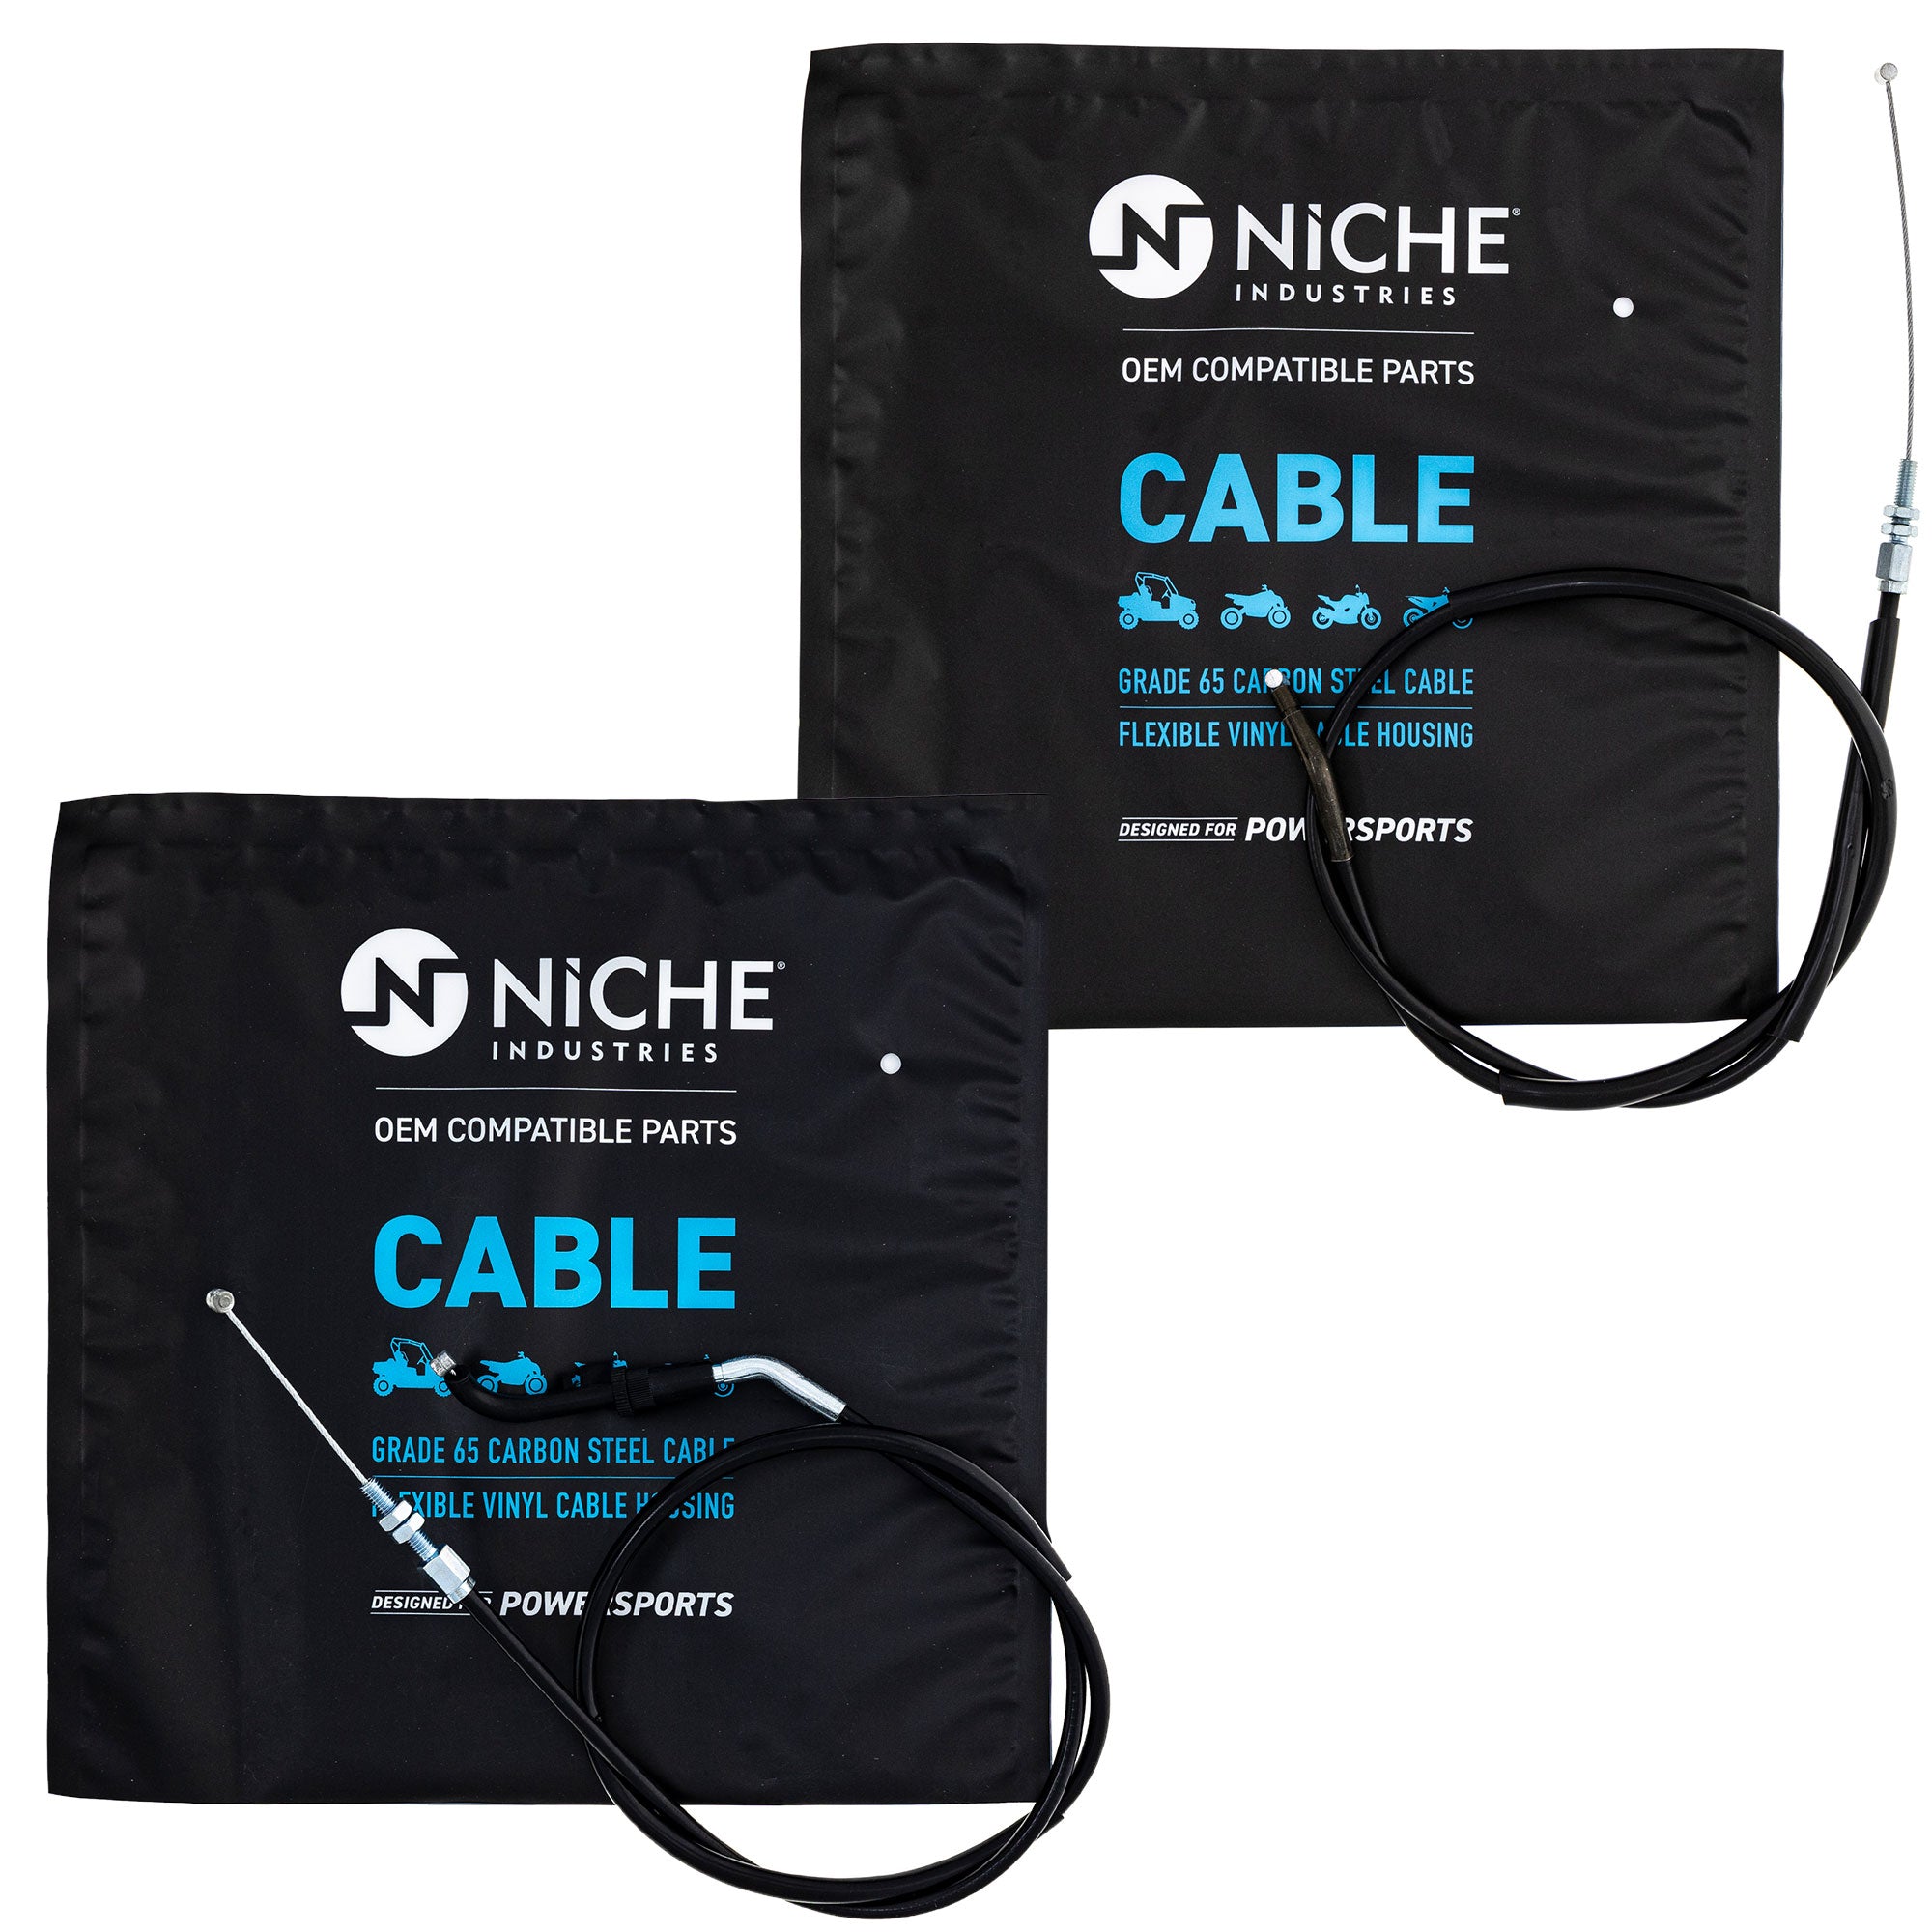 NICHE MK1005903 Throttle Cable for zOTHER Concours